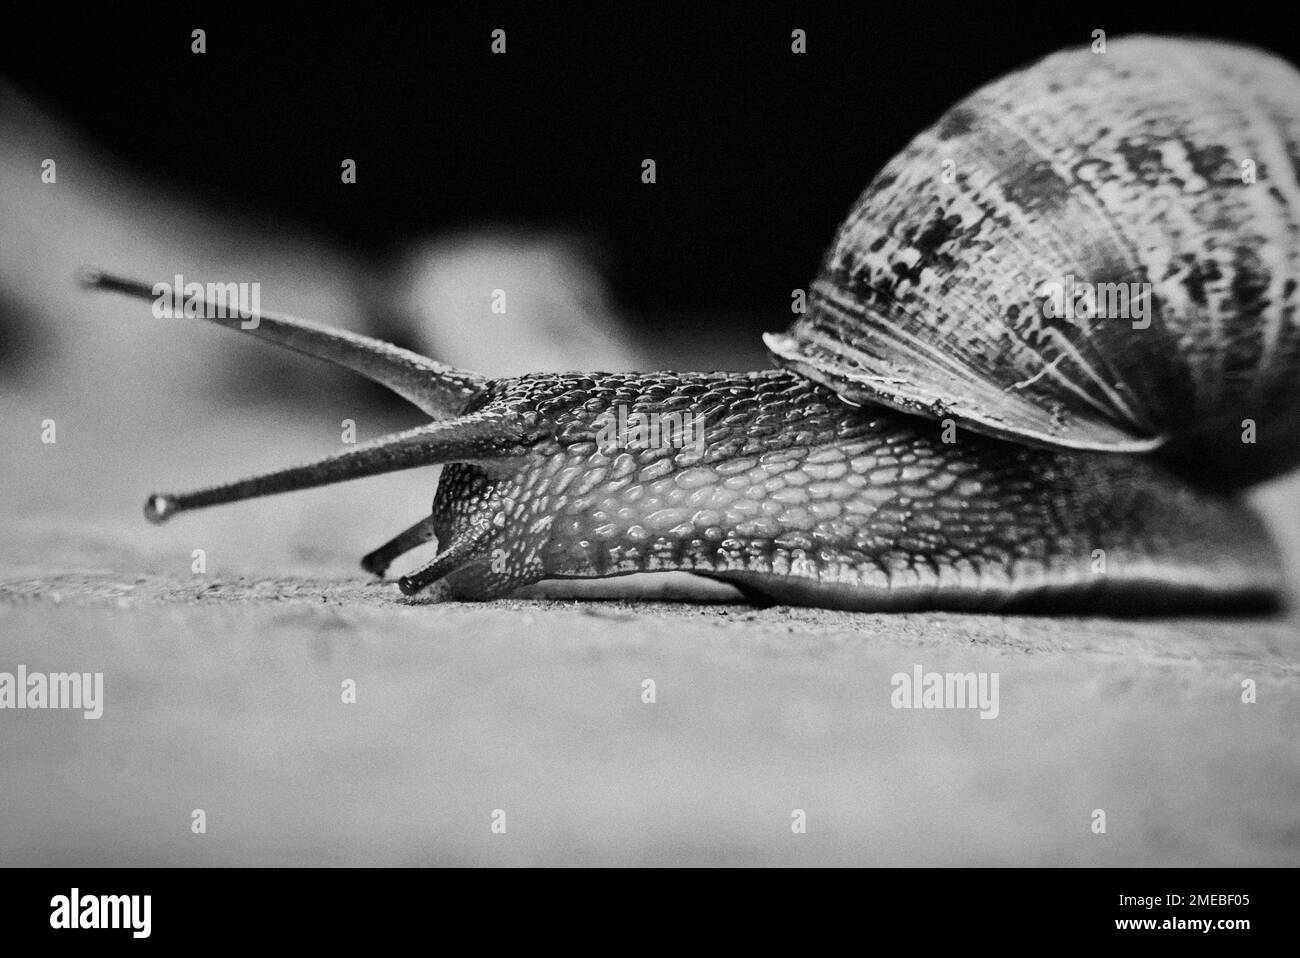 Black and White Close Up of a Common Garden Snail Stock Photo